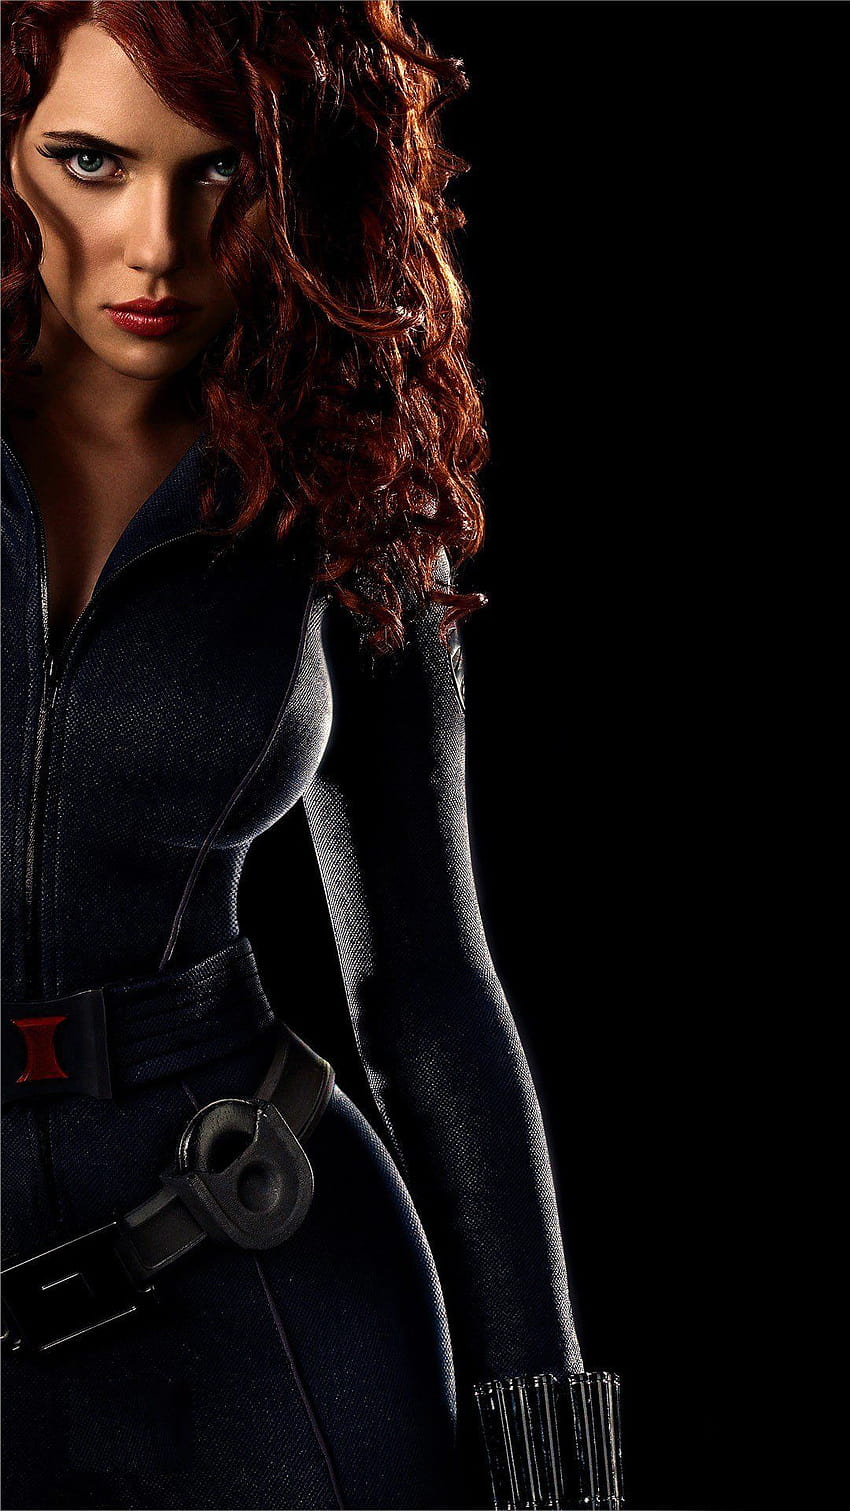 Black Widow Comic posted by Zoey Anderson, superhero black amoled HD phone wallpaper